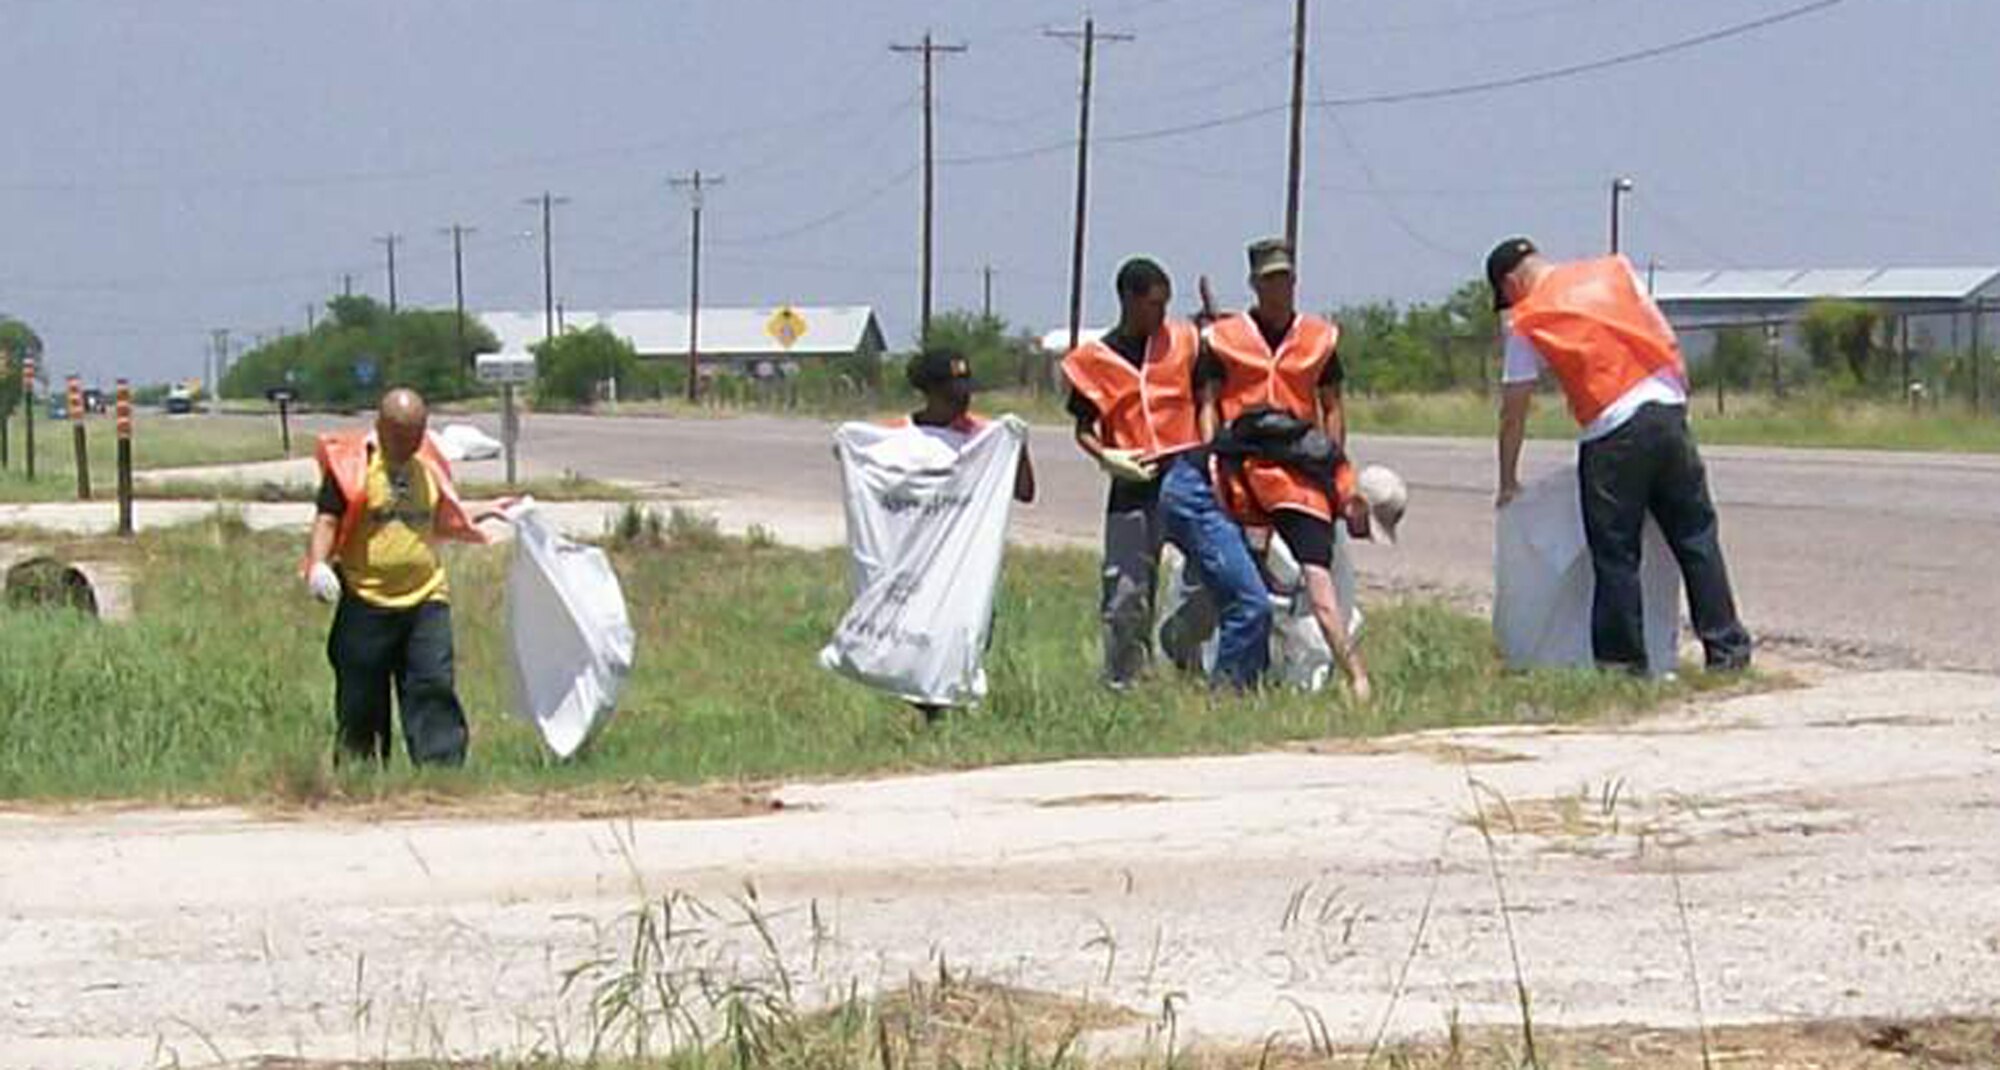 Members of the 7th Comptroller Squadron pick up trash along a two-mile section of Highway 277 June 7 as part of the adopt-a-highway program. Some base units have adopted parts of Abilene's roadways in an effort to keep the city beautiful and further enhance the Dyess-Abilene relationship. (Photo provided by Senior Master Sgt. Michael Guyer)